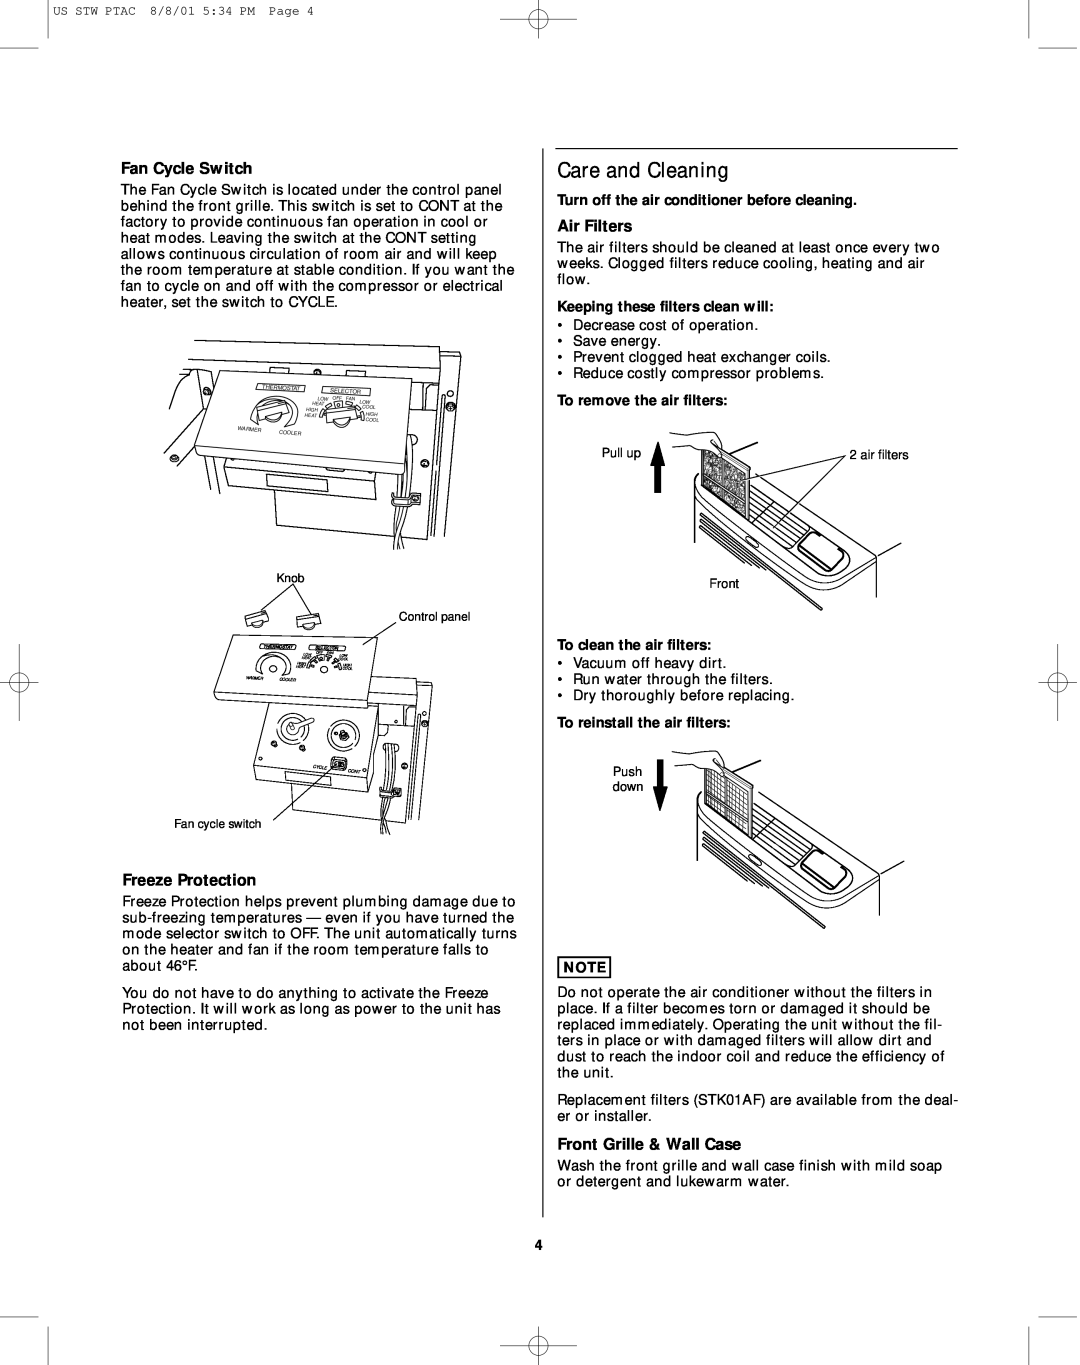 Sanyo STW-2 owner manual Care and Cleaning, Fan Cycle Switch, Air Filters, Freeze Protection, Front Grille & Wall Case 